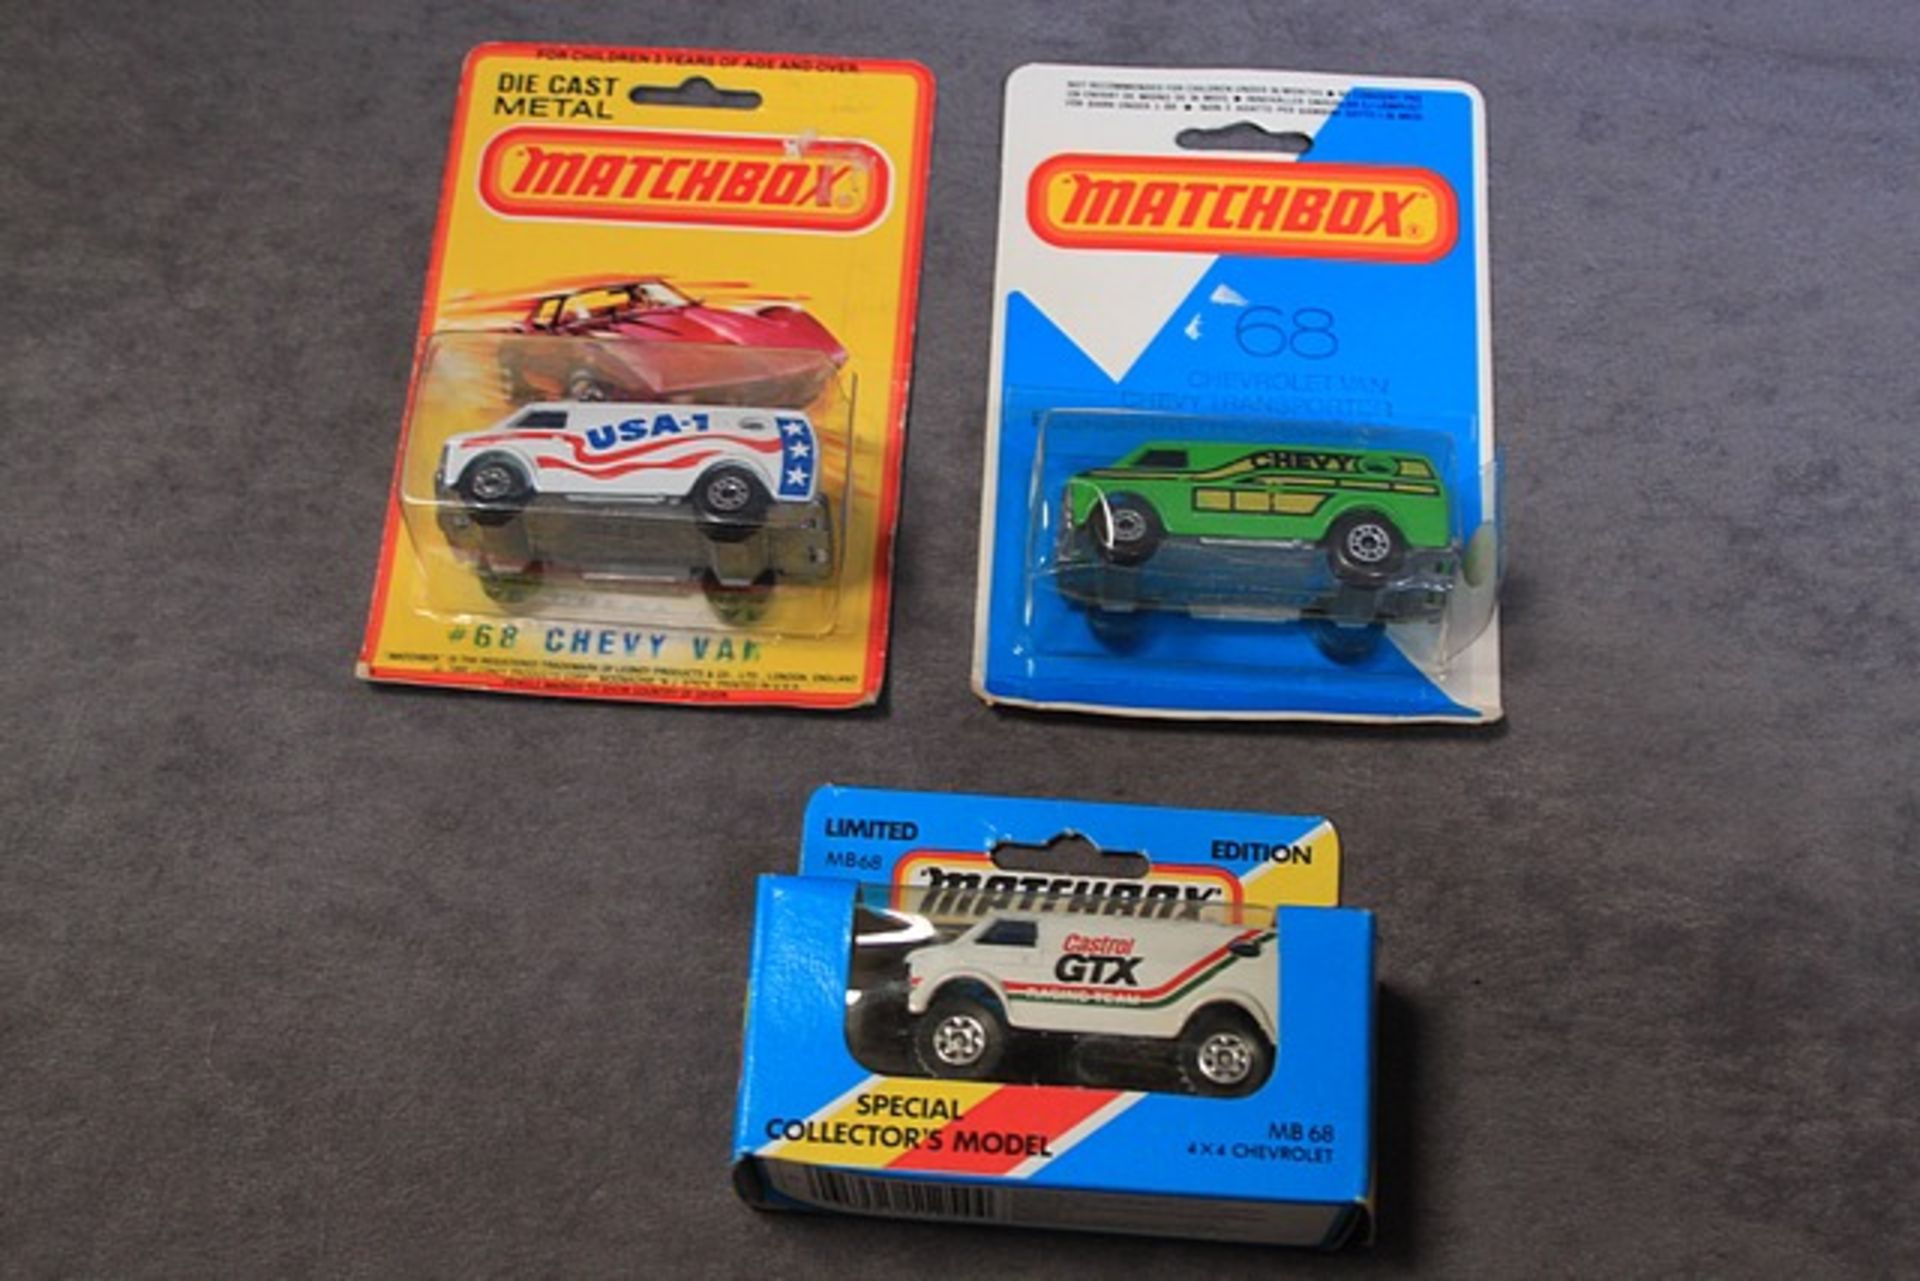 3 X Matchbox Diecast Models #68 Chevy Van USA1 White Mint On Good Card #68 Green Chevy Mint On - Image 2 of 2